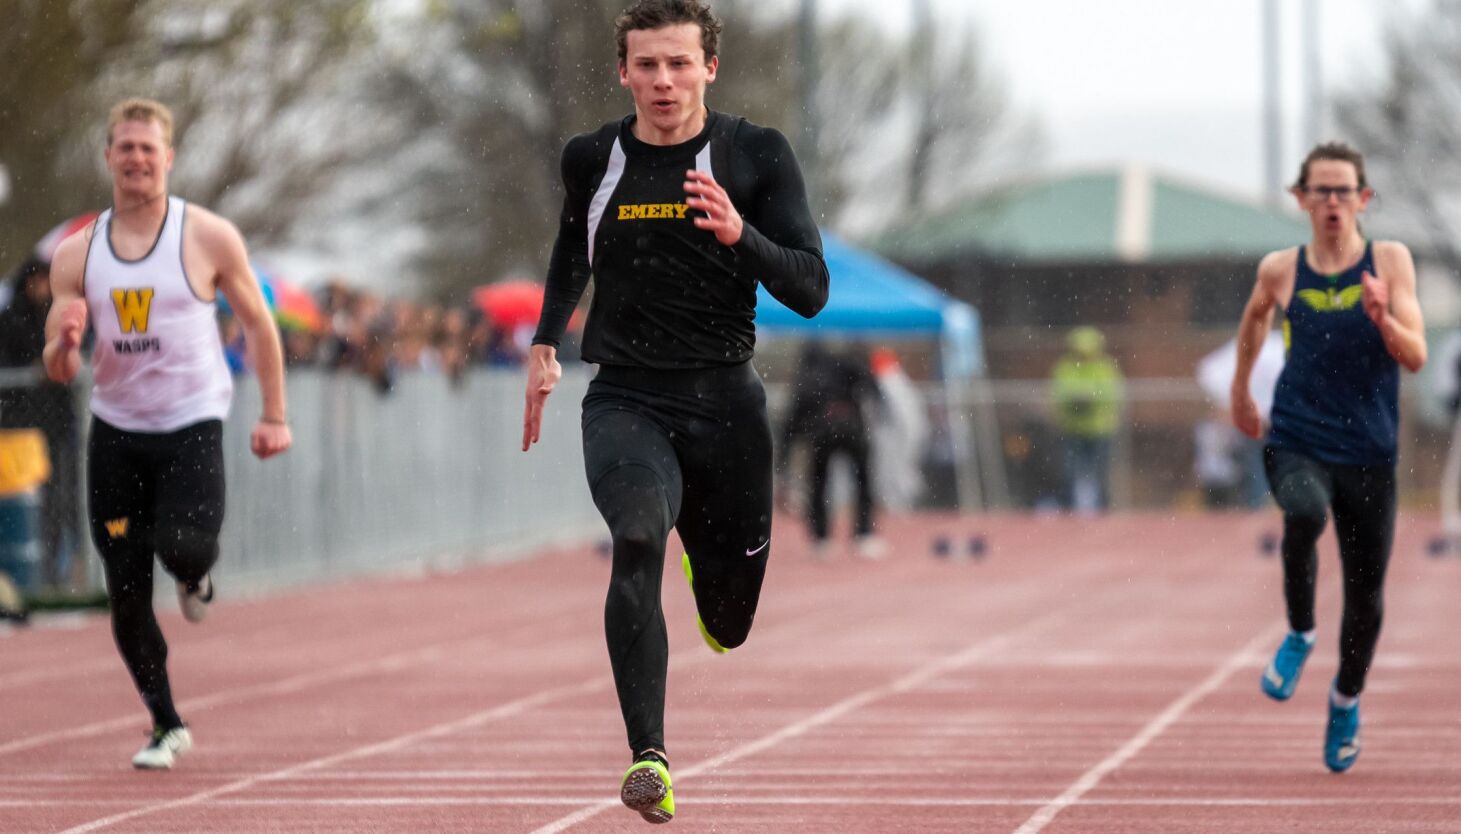   
																High school sports 20 for 20: Emery sprinter Braiden Ivie keeping focused amid COVID-19 frustration in hopes he can still chase state records 
															 